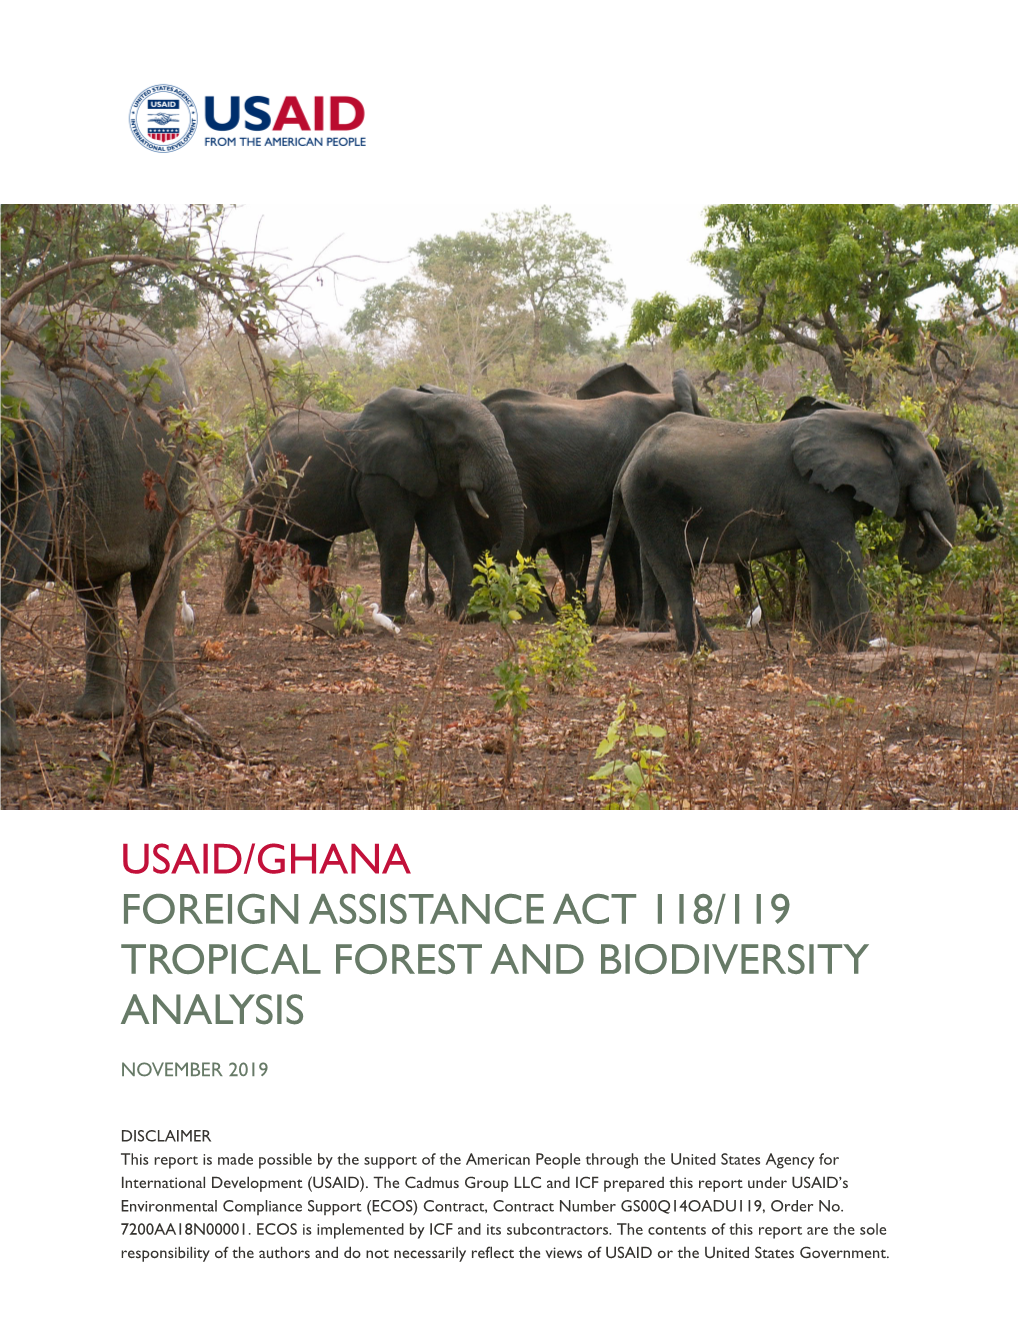 Usaid/Ghana Foreign Assistance Act 118/119 Tropical Forest and Biodiversity Analysis